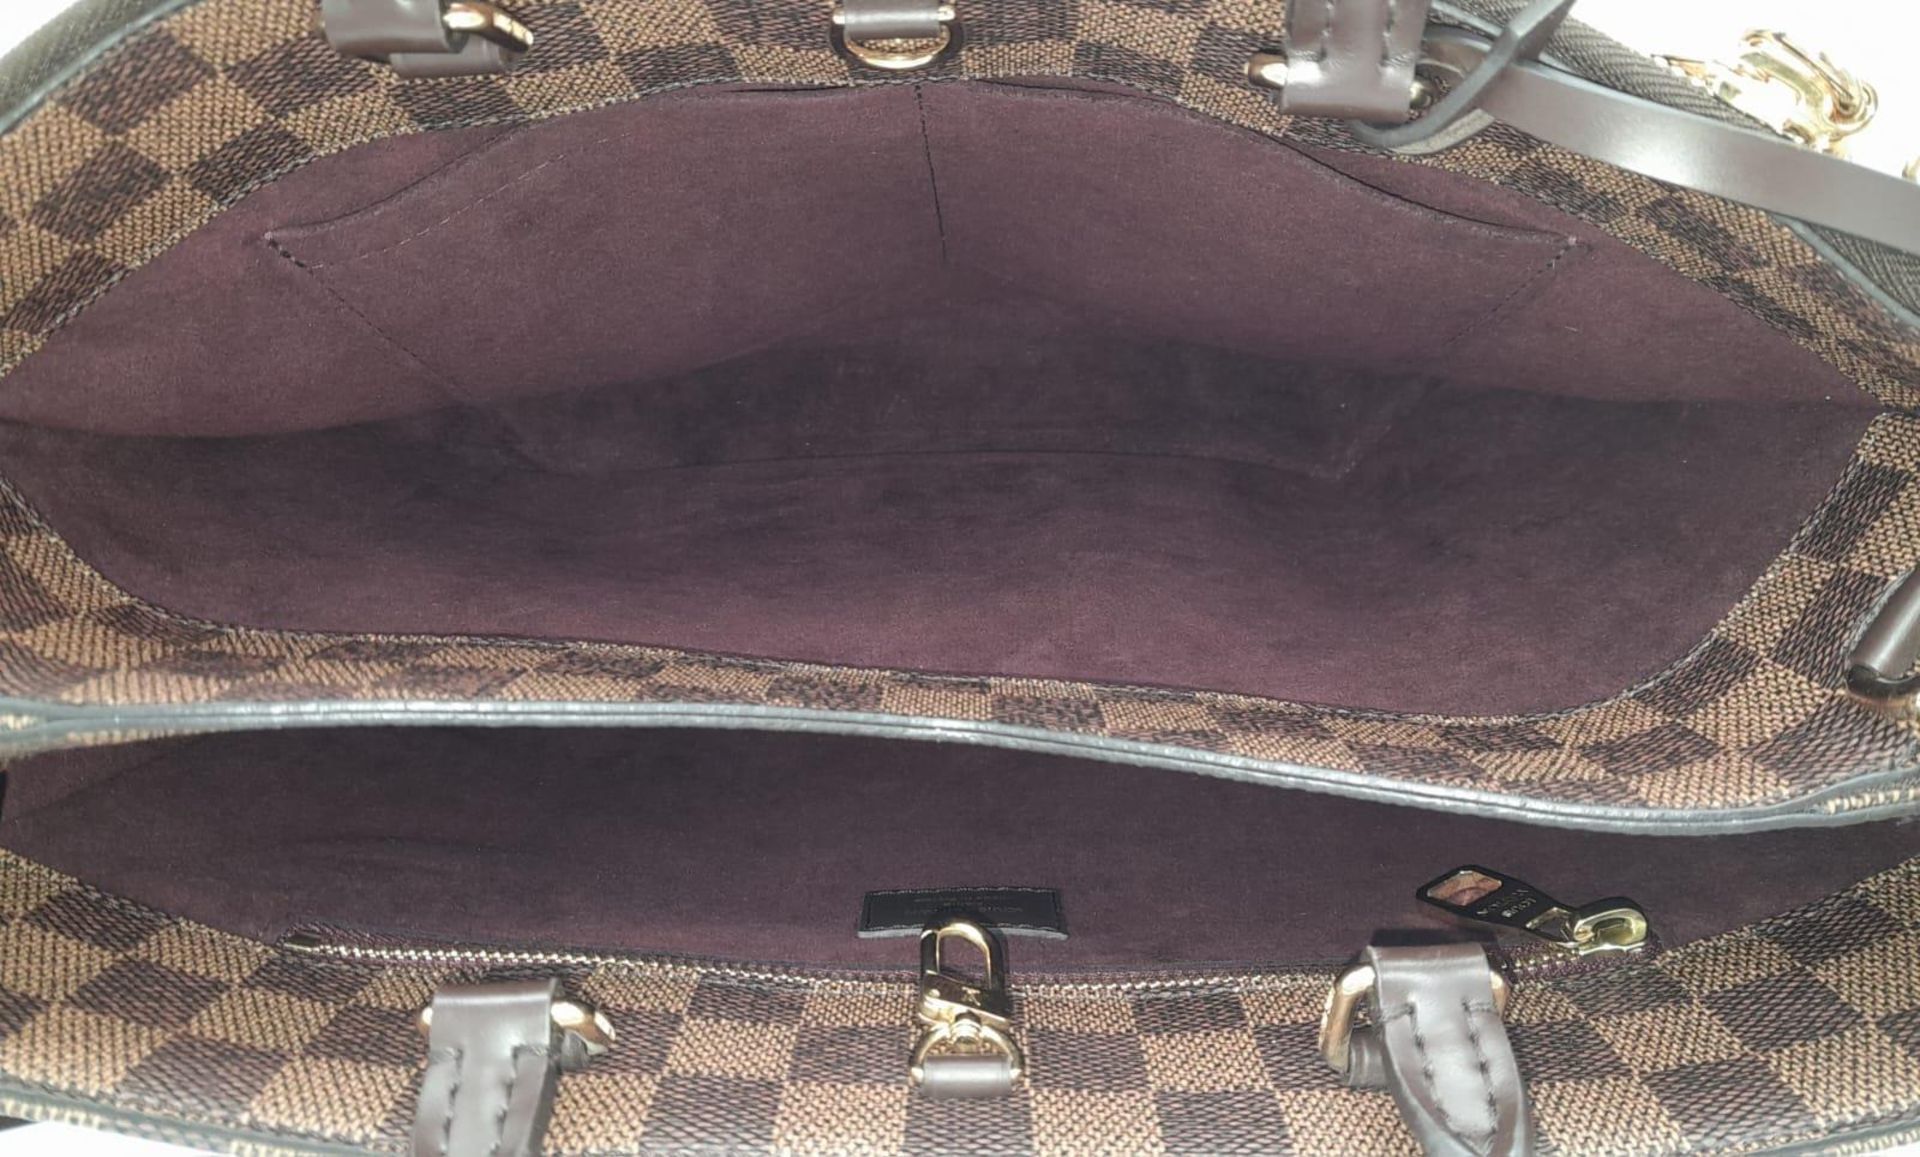 A Louis Vuitton Damier Ebene Brampton Handbag. Leather exterior with two rolled leather handles, - Image 11 of 11